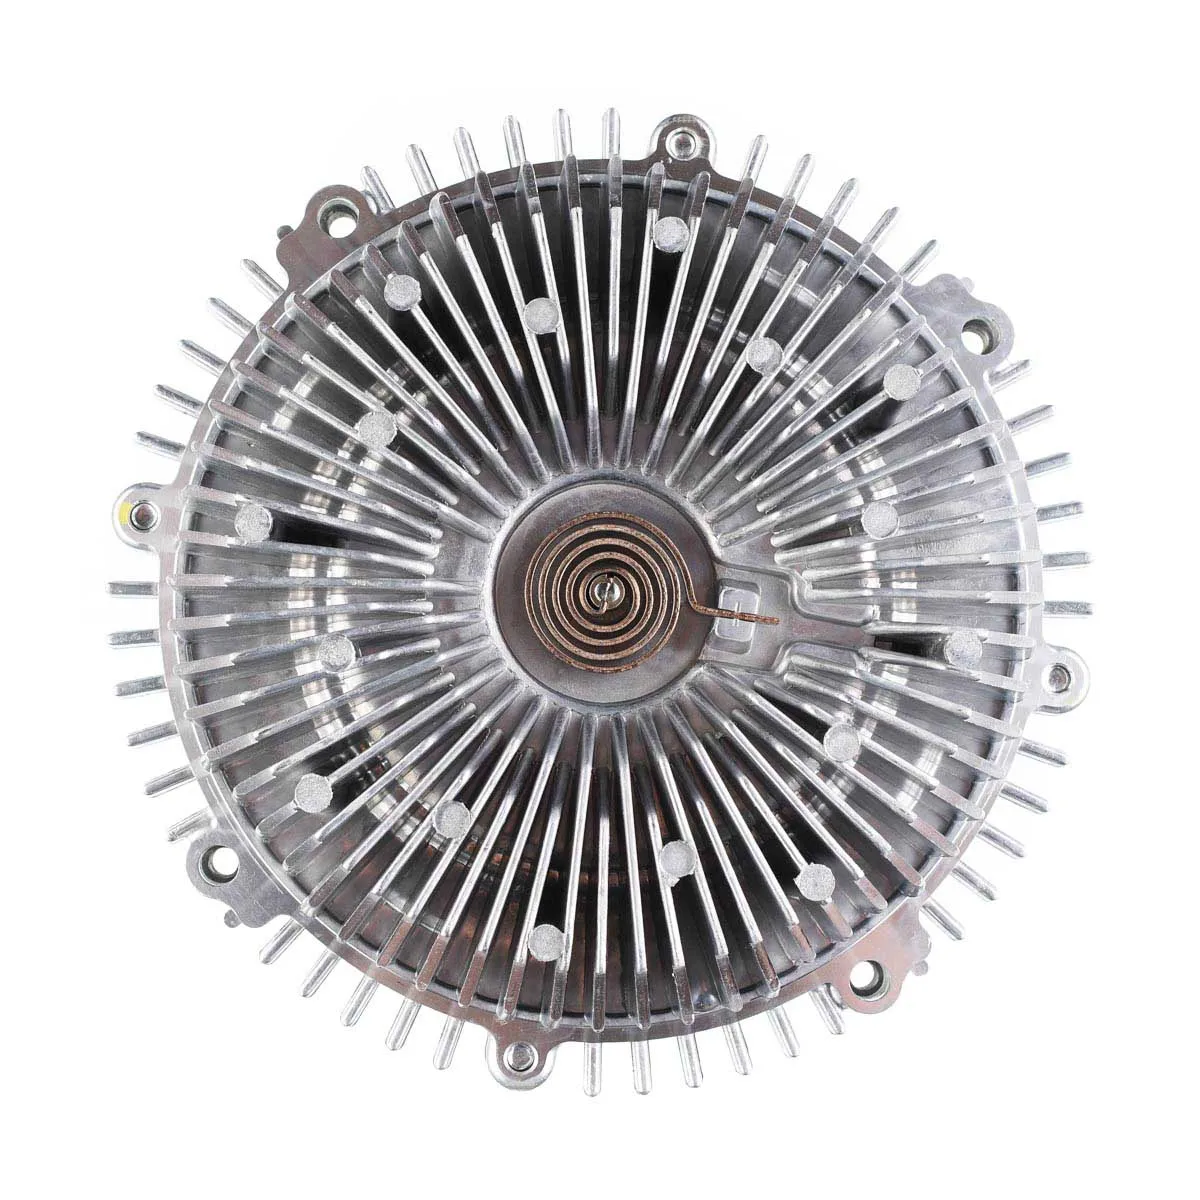 ECCPP Engine Cooling Fan Clutch Replacement fit for 2004-2010 Infiniti QX56 2004-2015 Nissan Titan/Pathfinder/Armada 